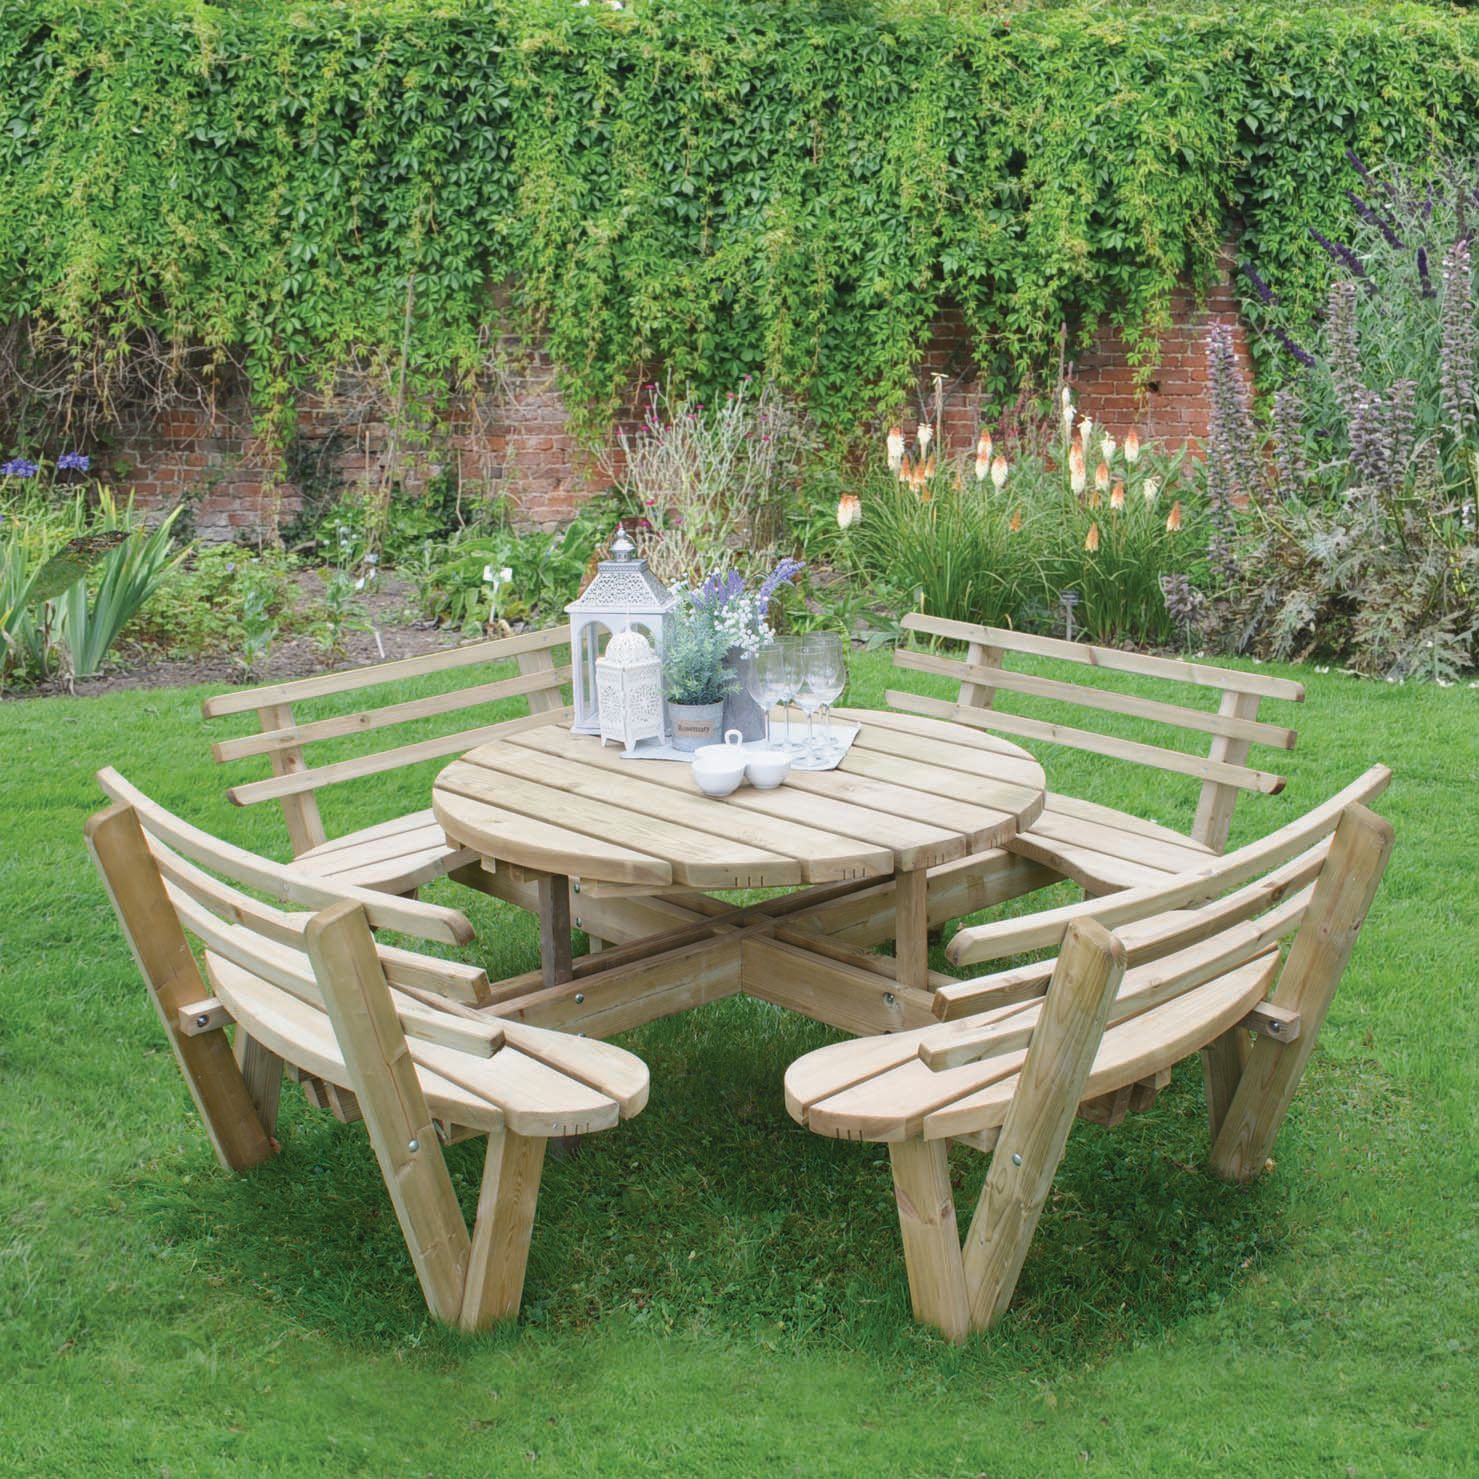 Image of Forest Garden Circular Picnic Table with Seat Backs